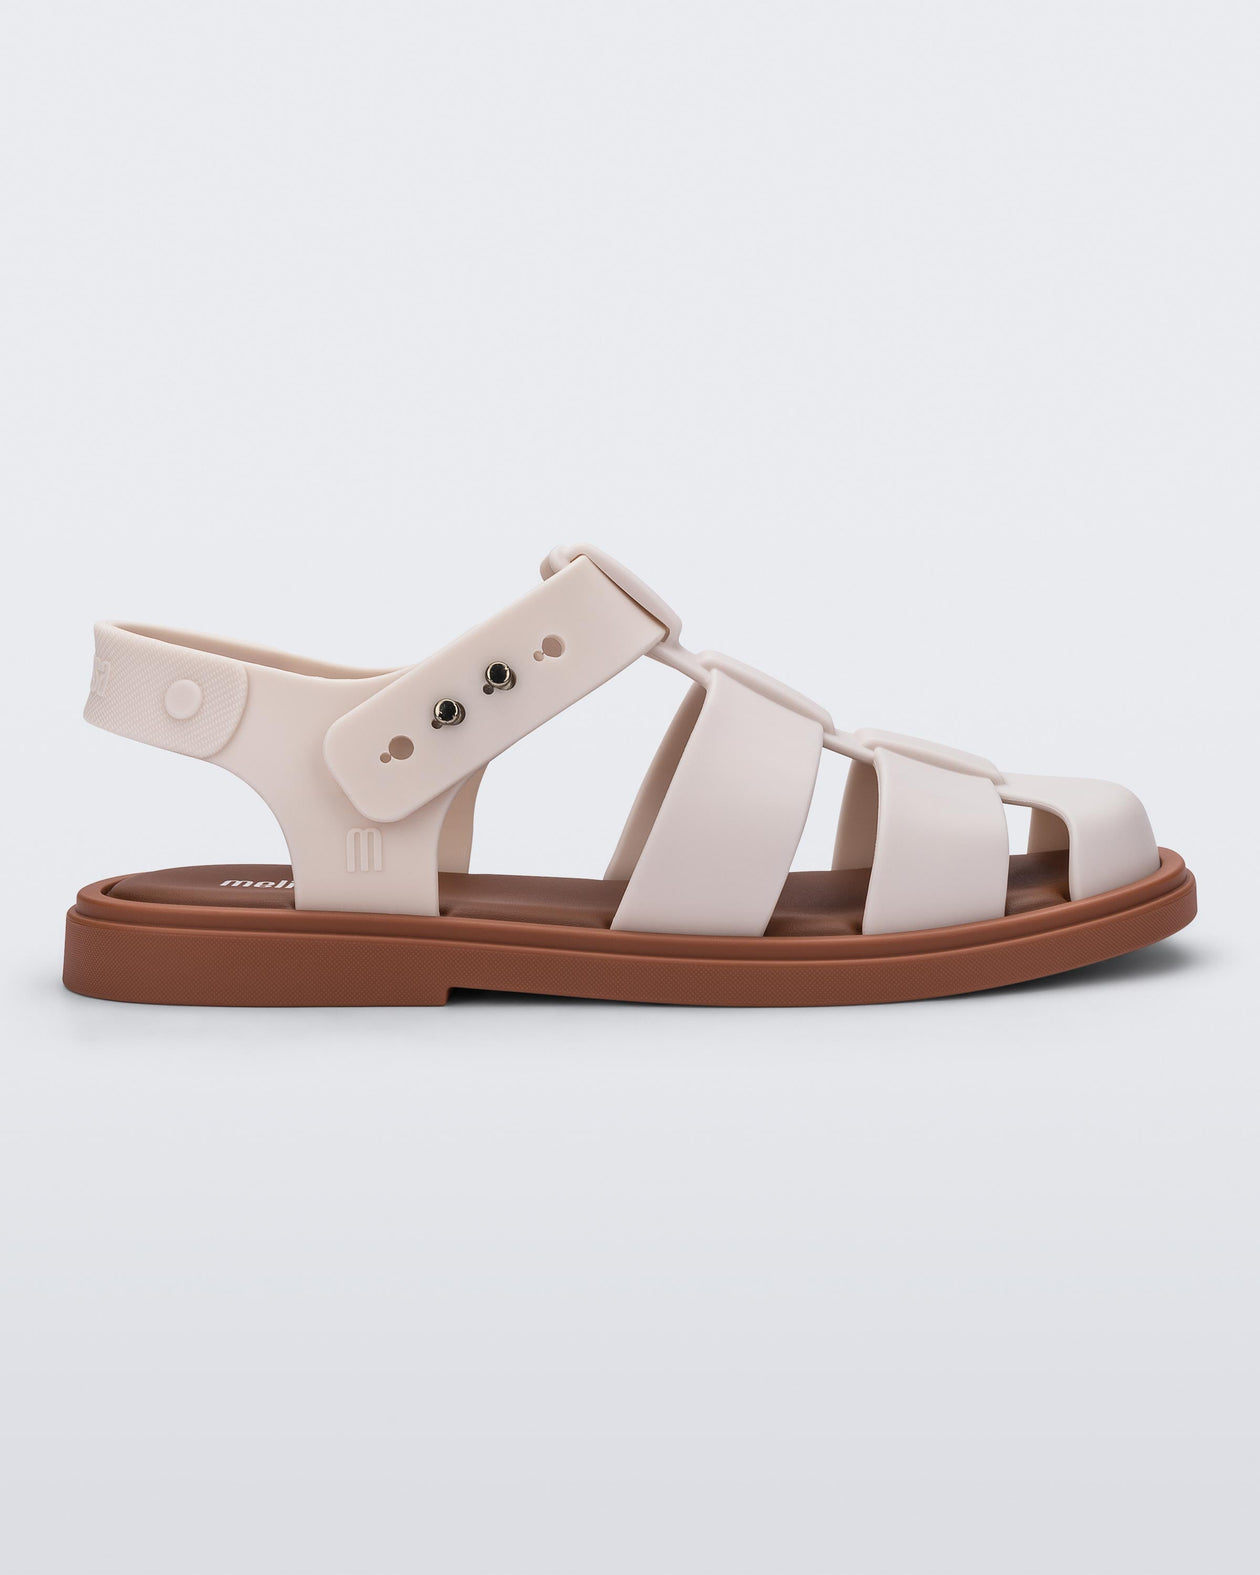 Side view of a beige Emma women's sandal with brown sole.